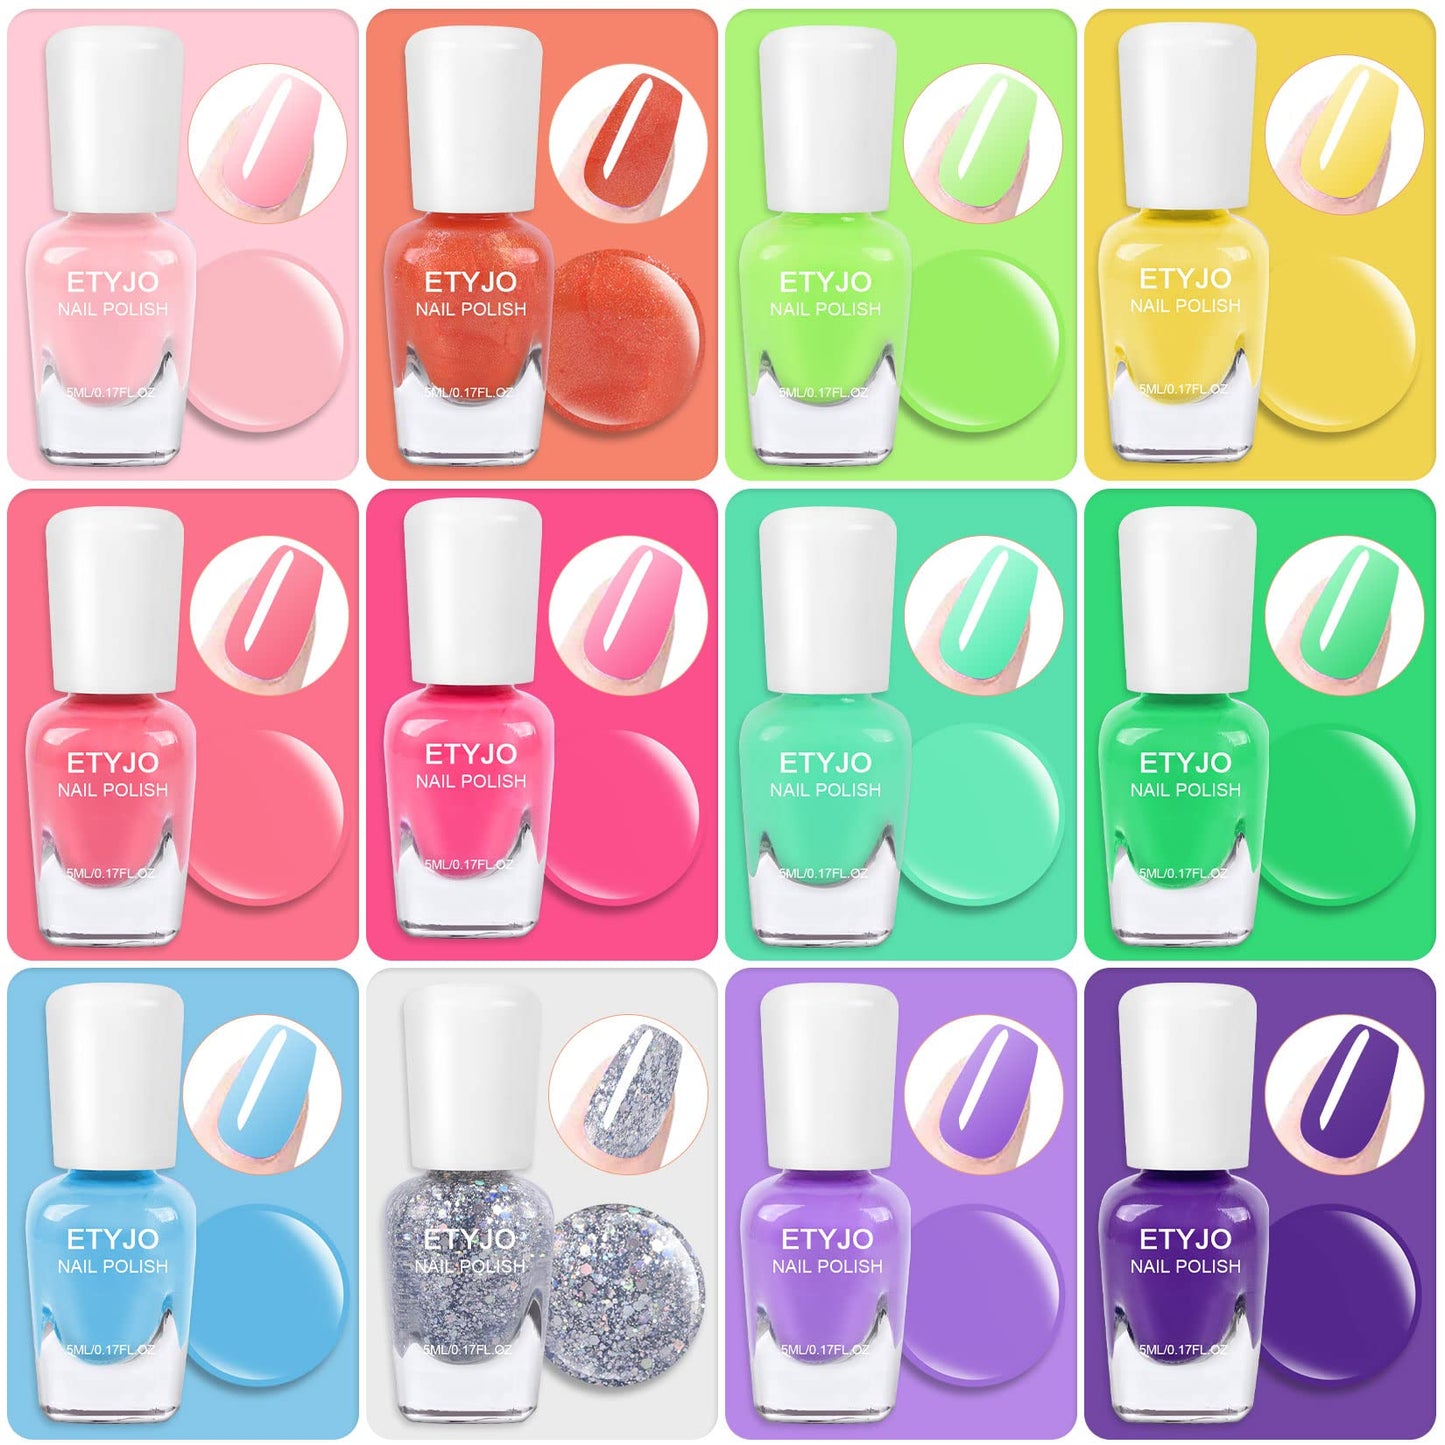 ETYJO Kids Nail Polish Set - Nail Polish for Girls Ages 3-12 | 12 Rainbow Colors | Non-toxic, Water-based, Low Odor | Peel-off, Quick Dry | Children Nail Polish Kit for Teens, Children, and Toddlers